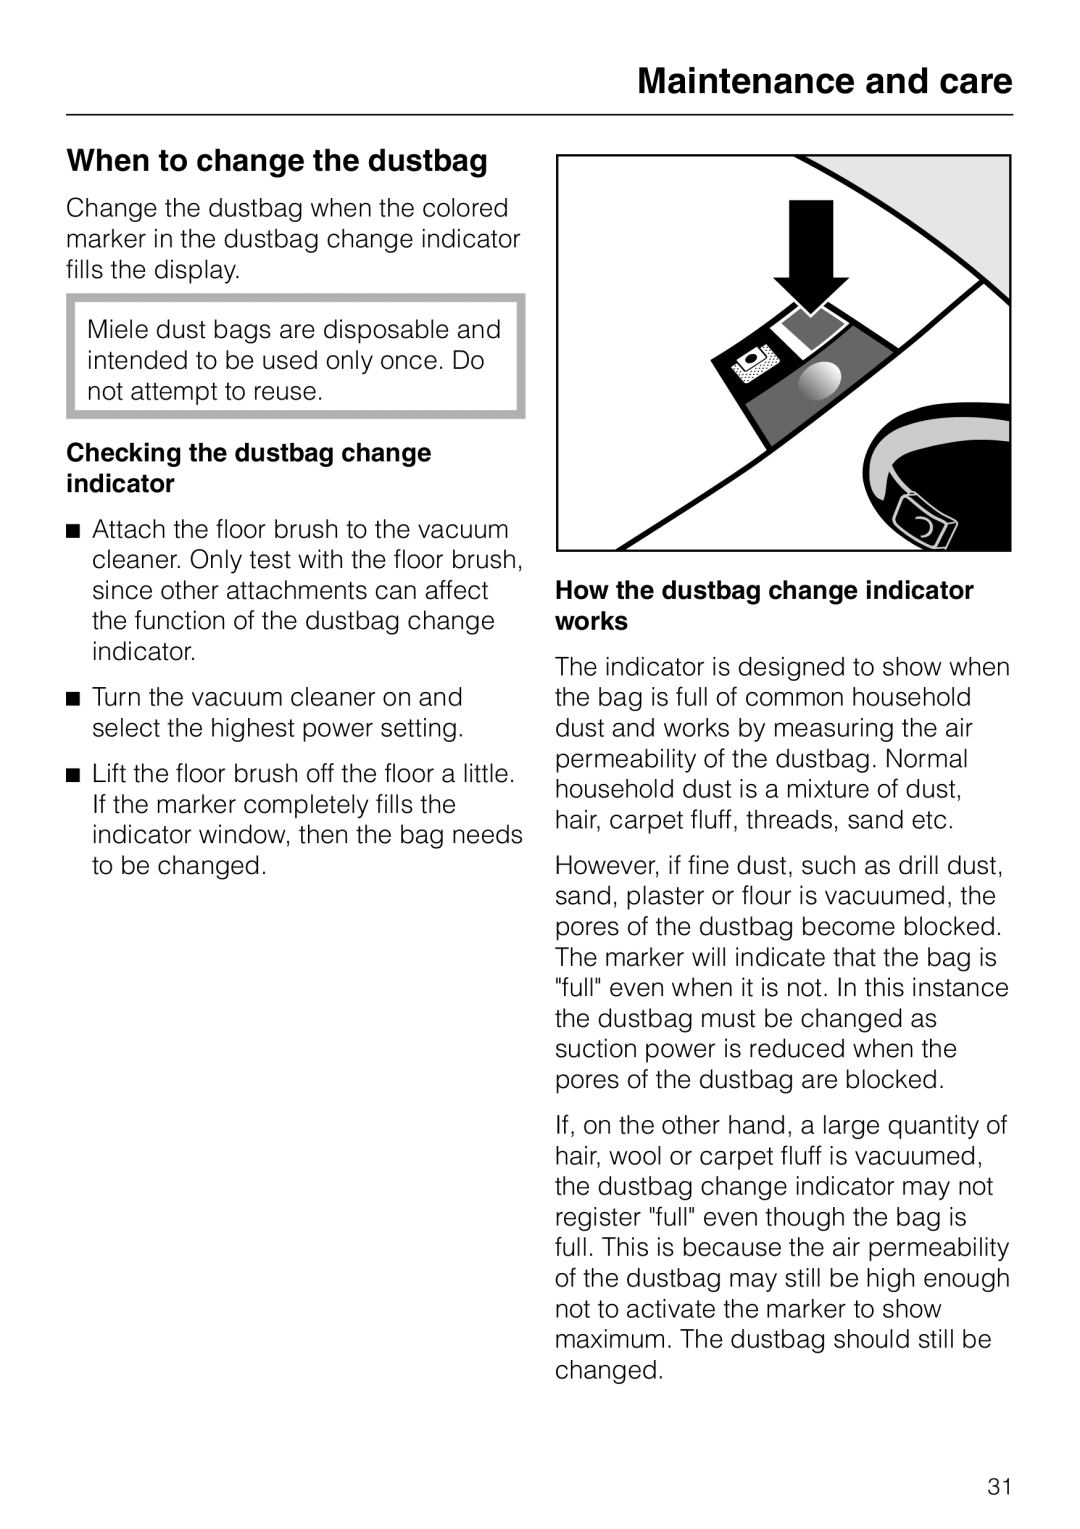 Miele S 558 manual When to change the dustbag, Maintenance and care, Checking the dustbag change indicator 